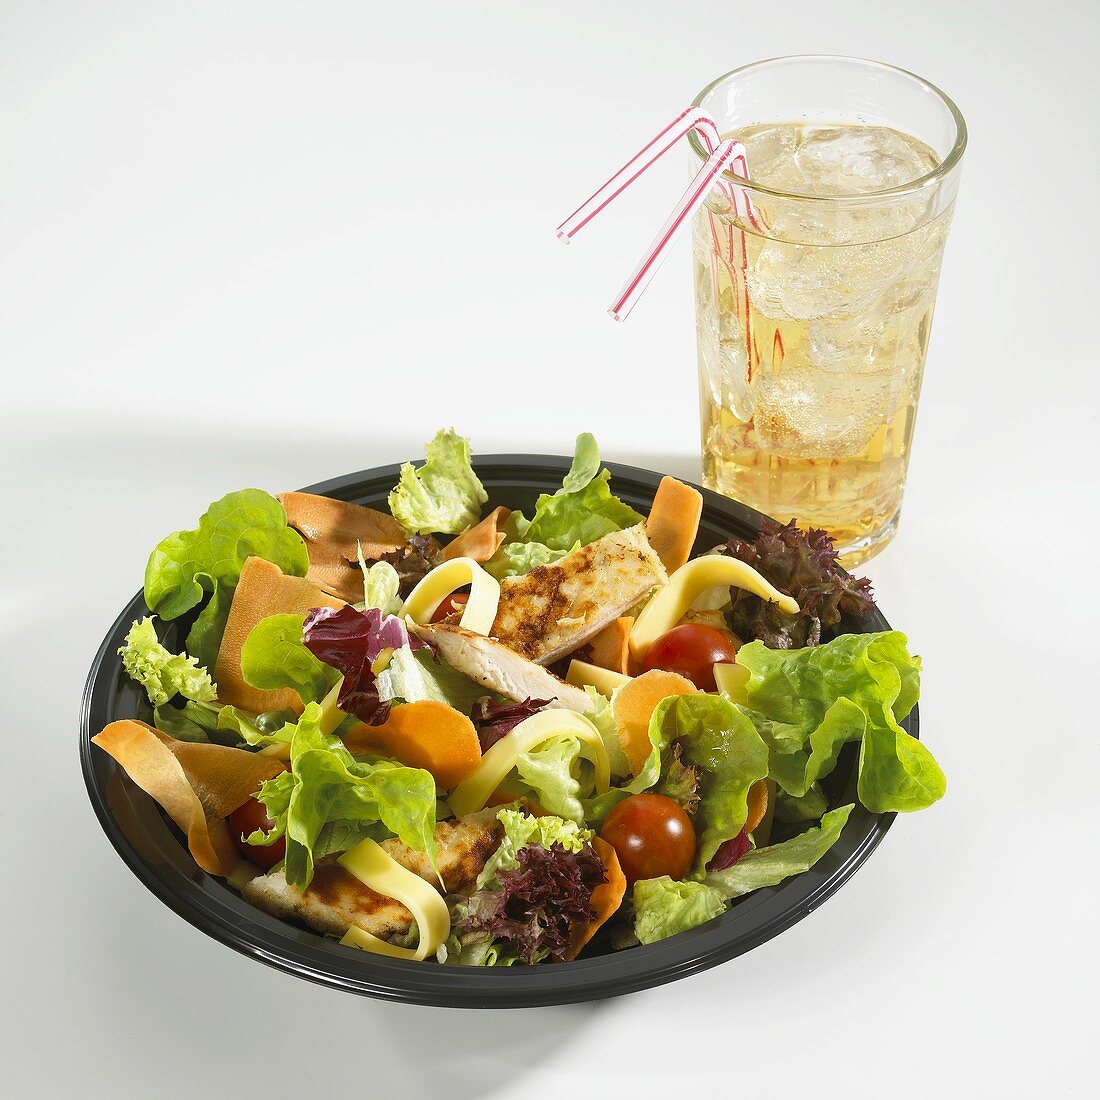 Green salad with chicken breast & vegetables, glass of lemonade